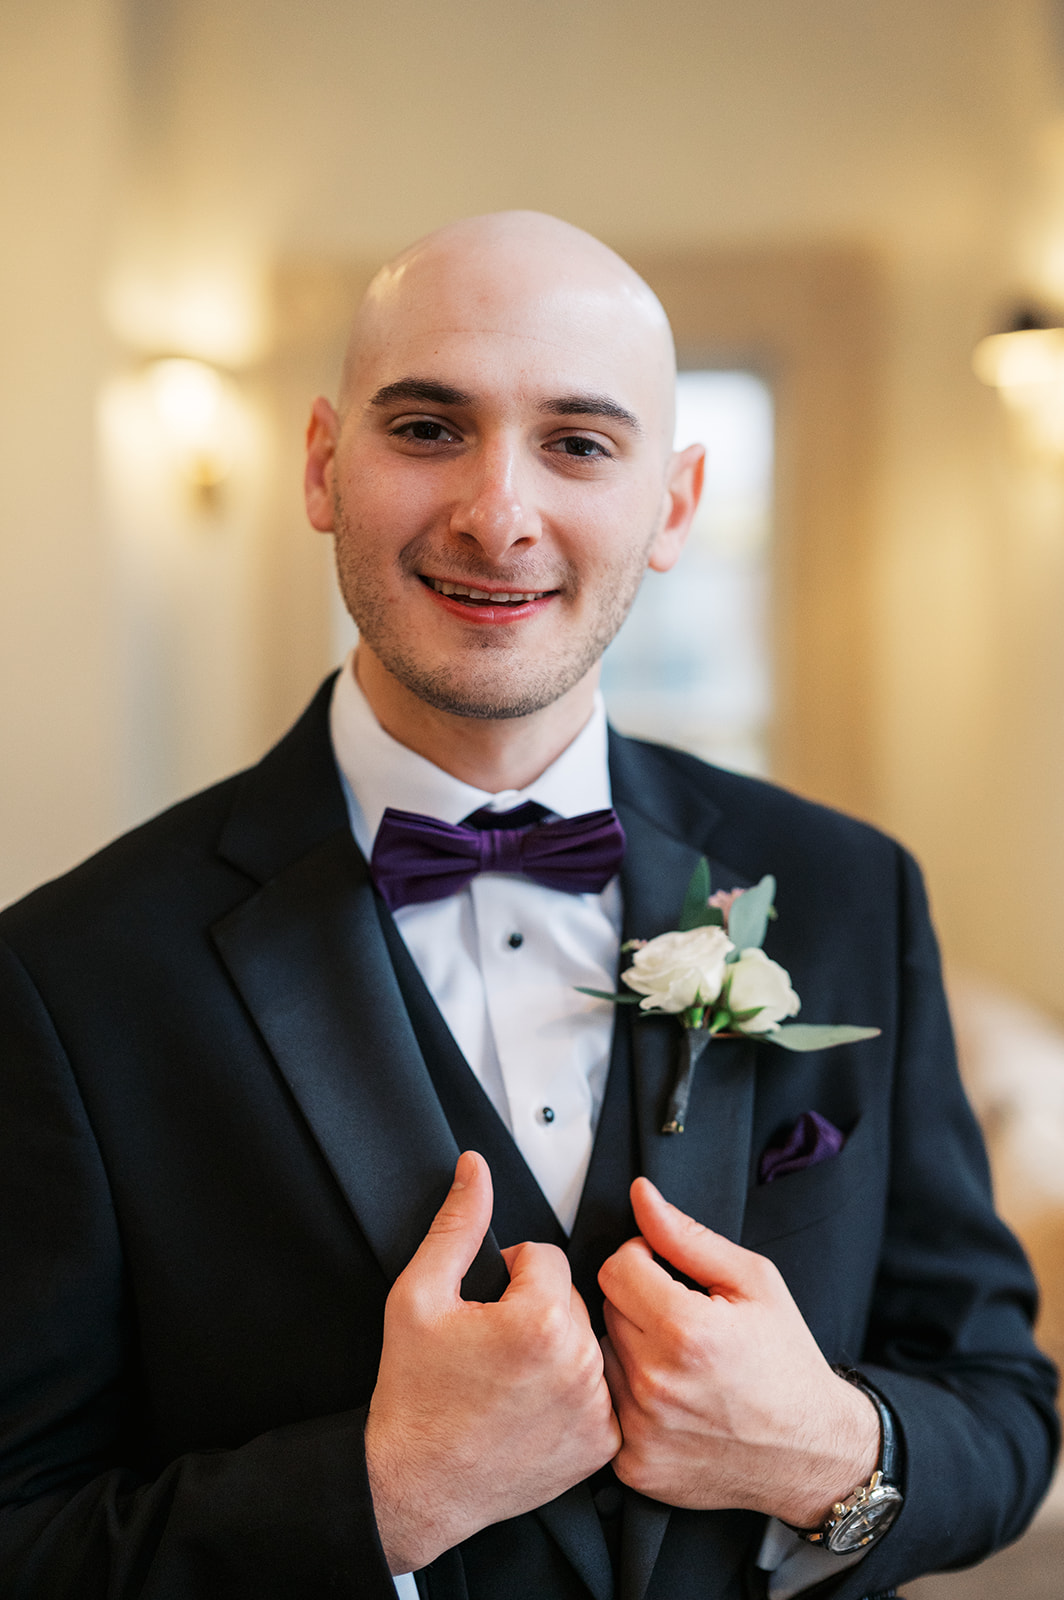 A groom smiles and holds his lapels while getting ready for his wedding